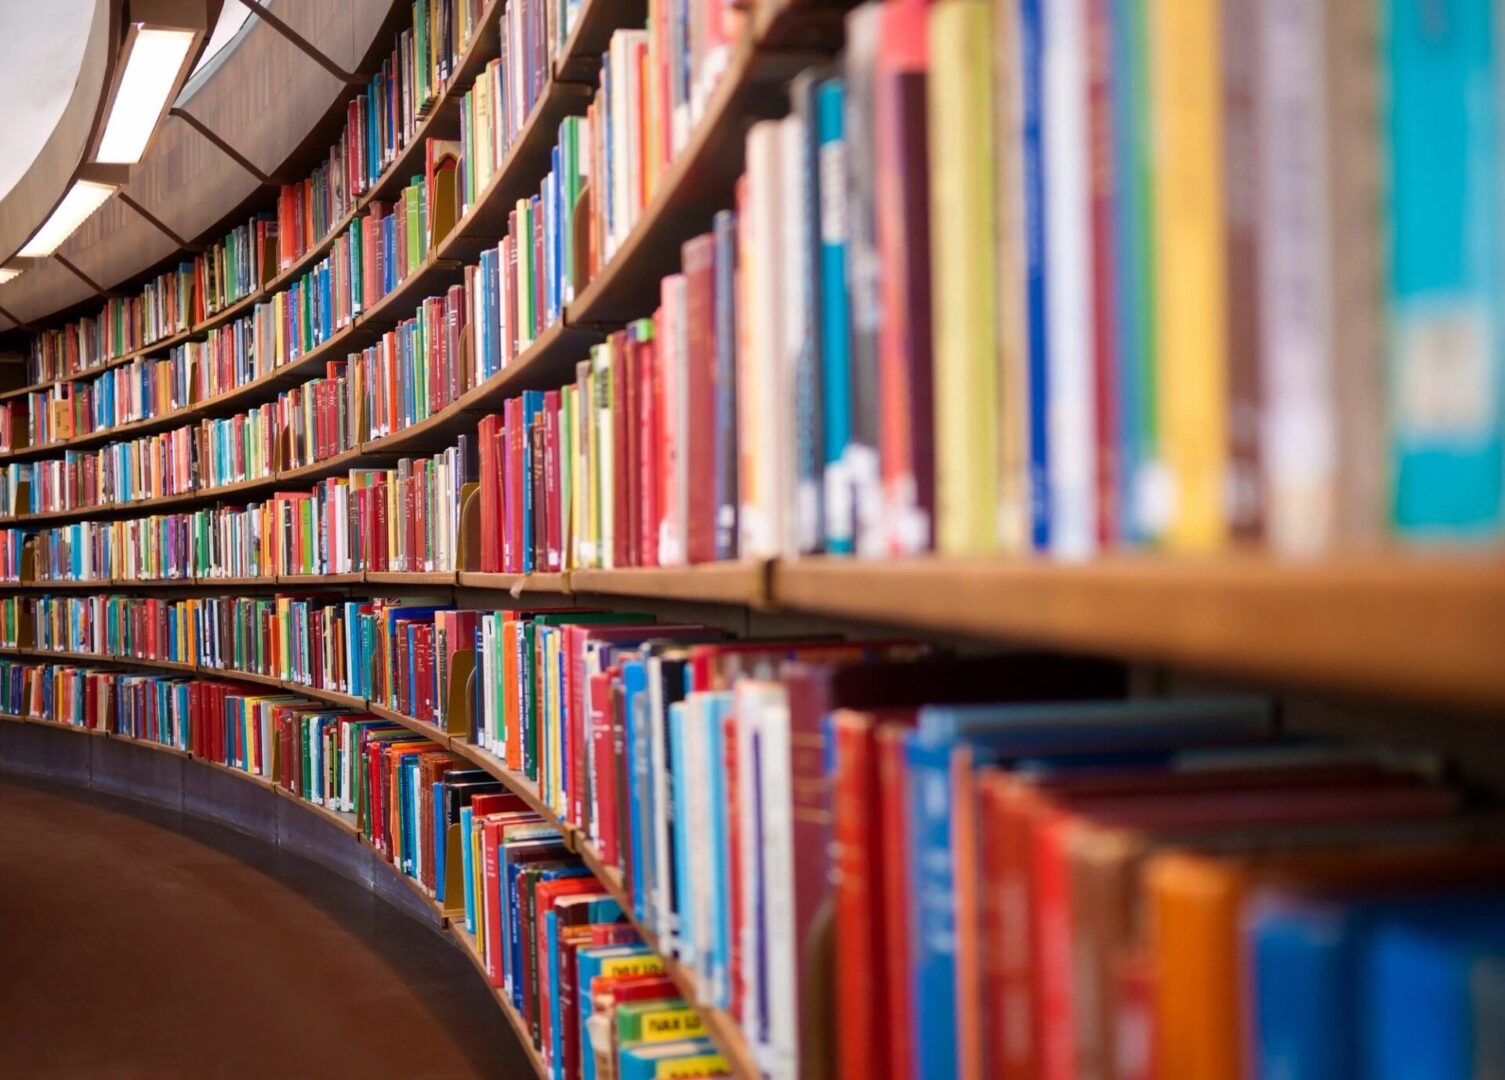 A row of books on shelves in a library.